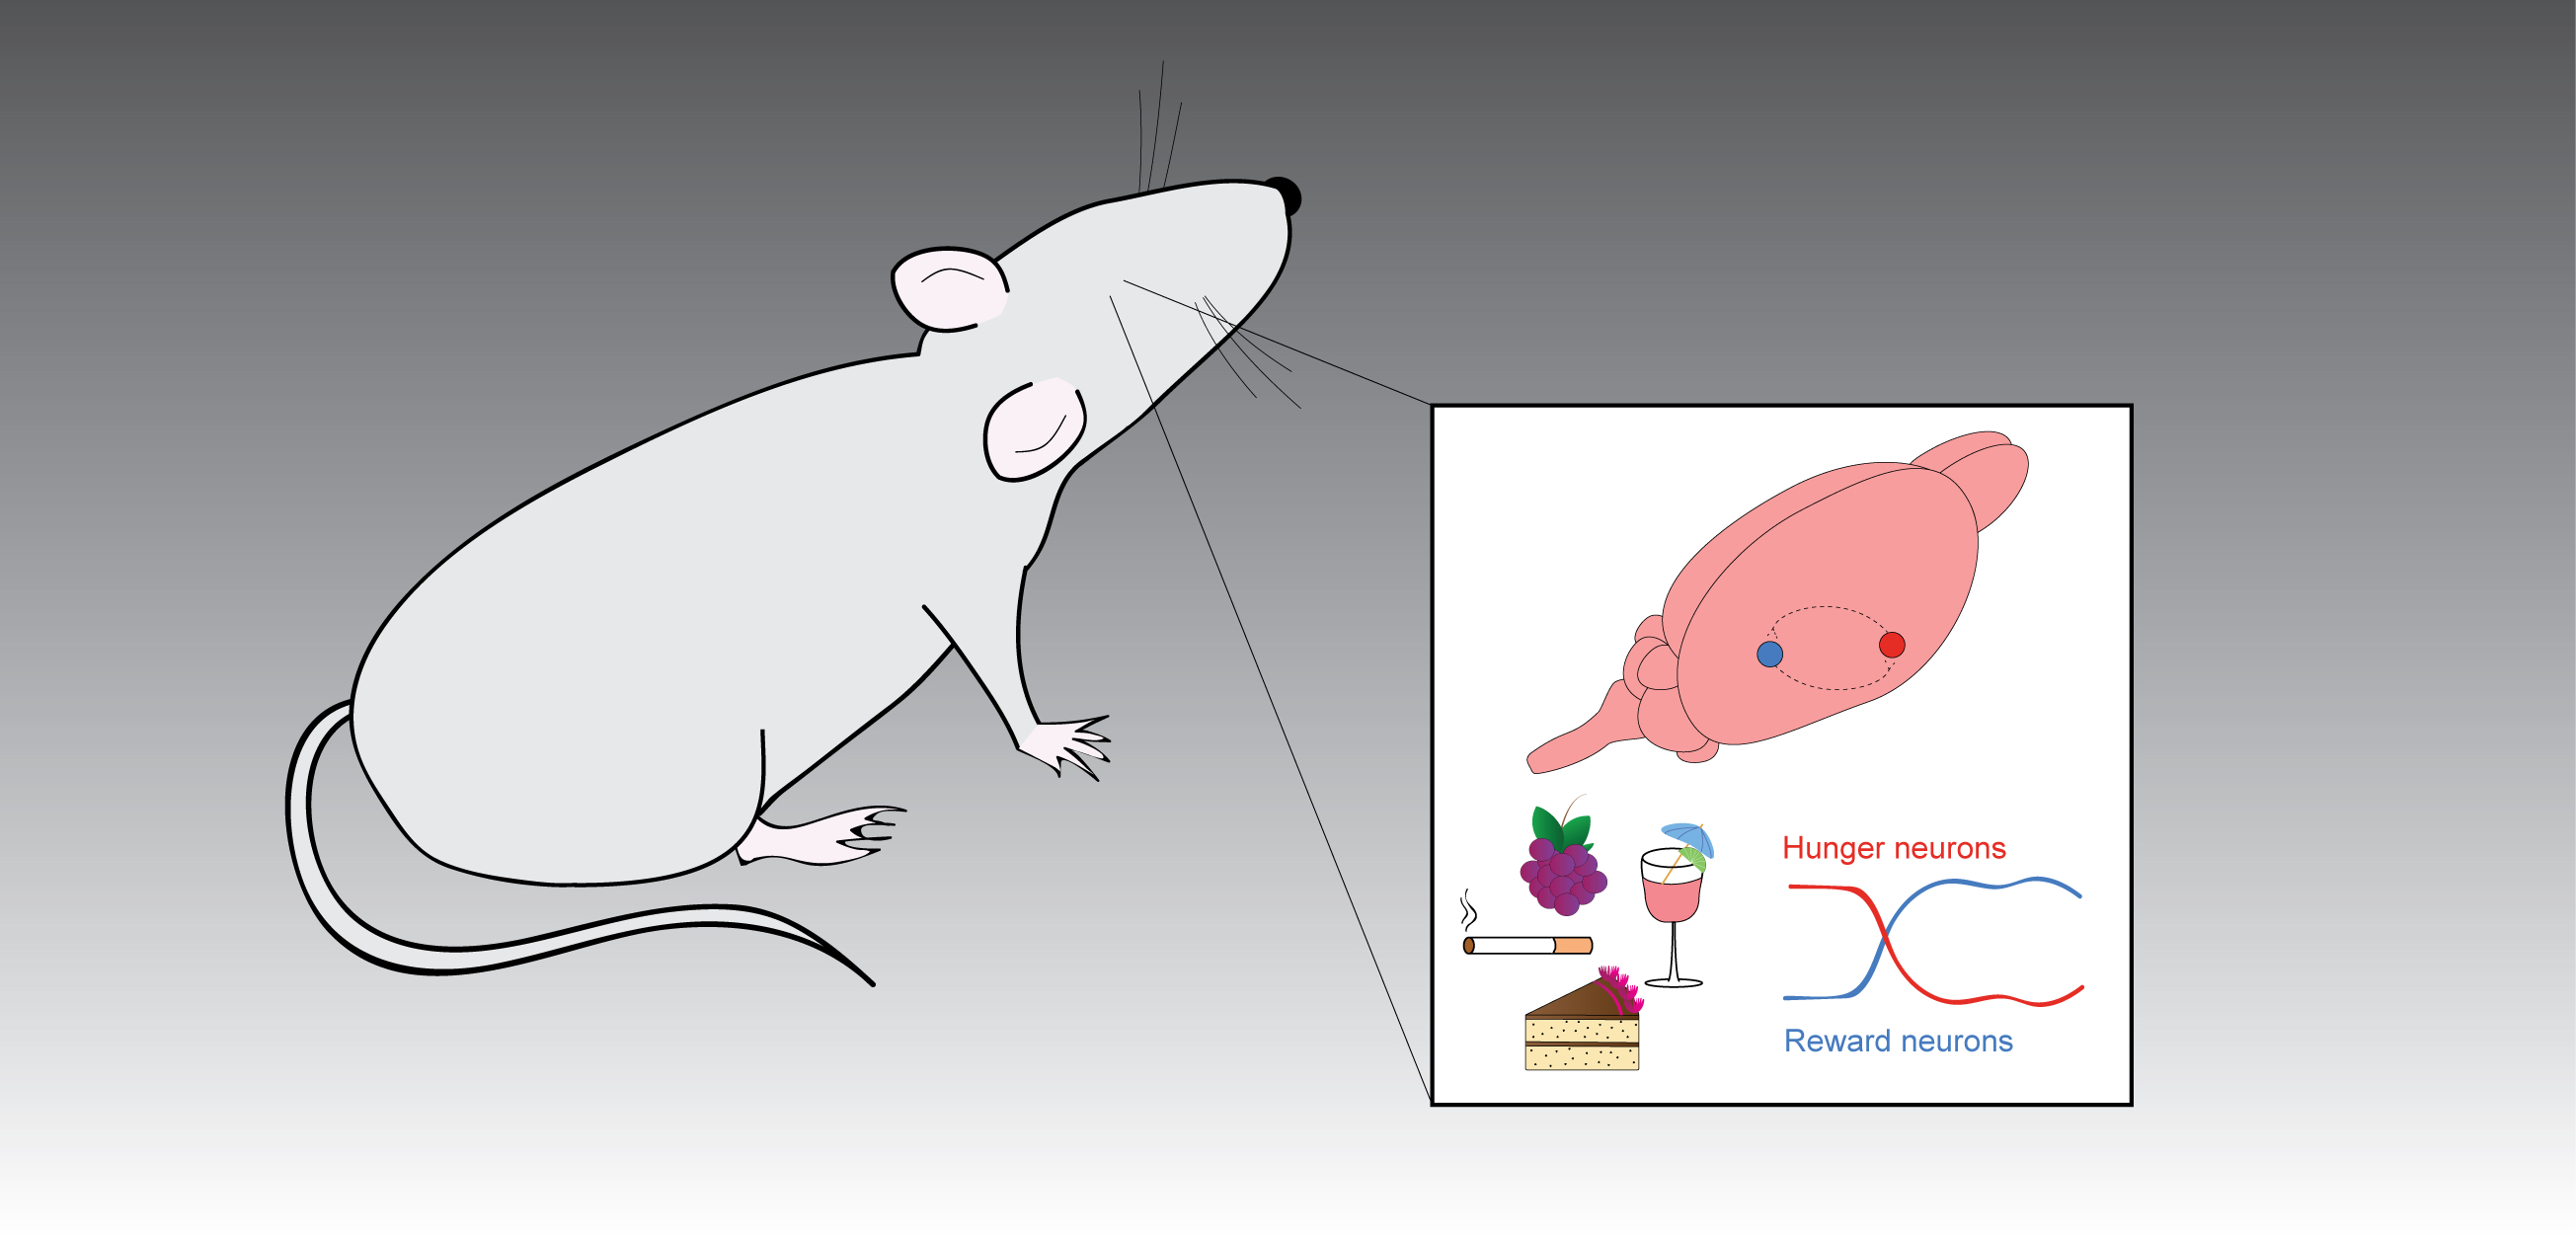 illustration of a mouse with an inset showing its brain, a cigarette, alcohol and chocolate cake and graph showing a connection between hunger and reward neurons